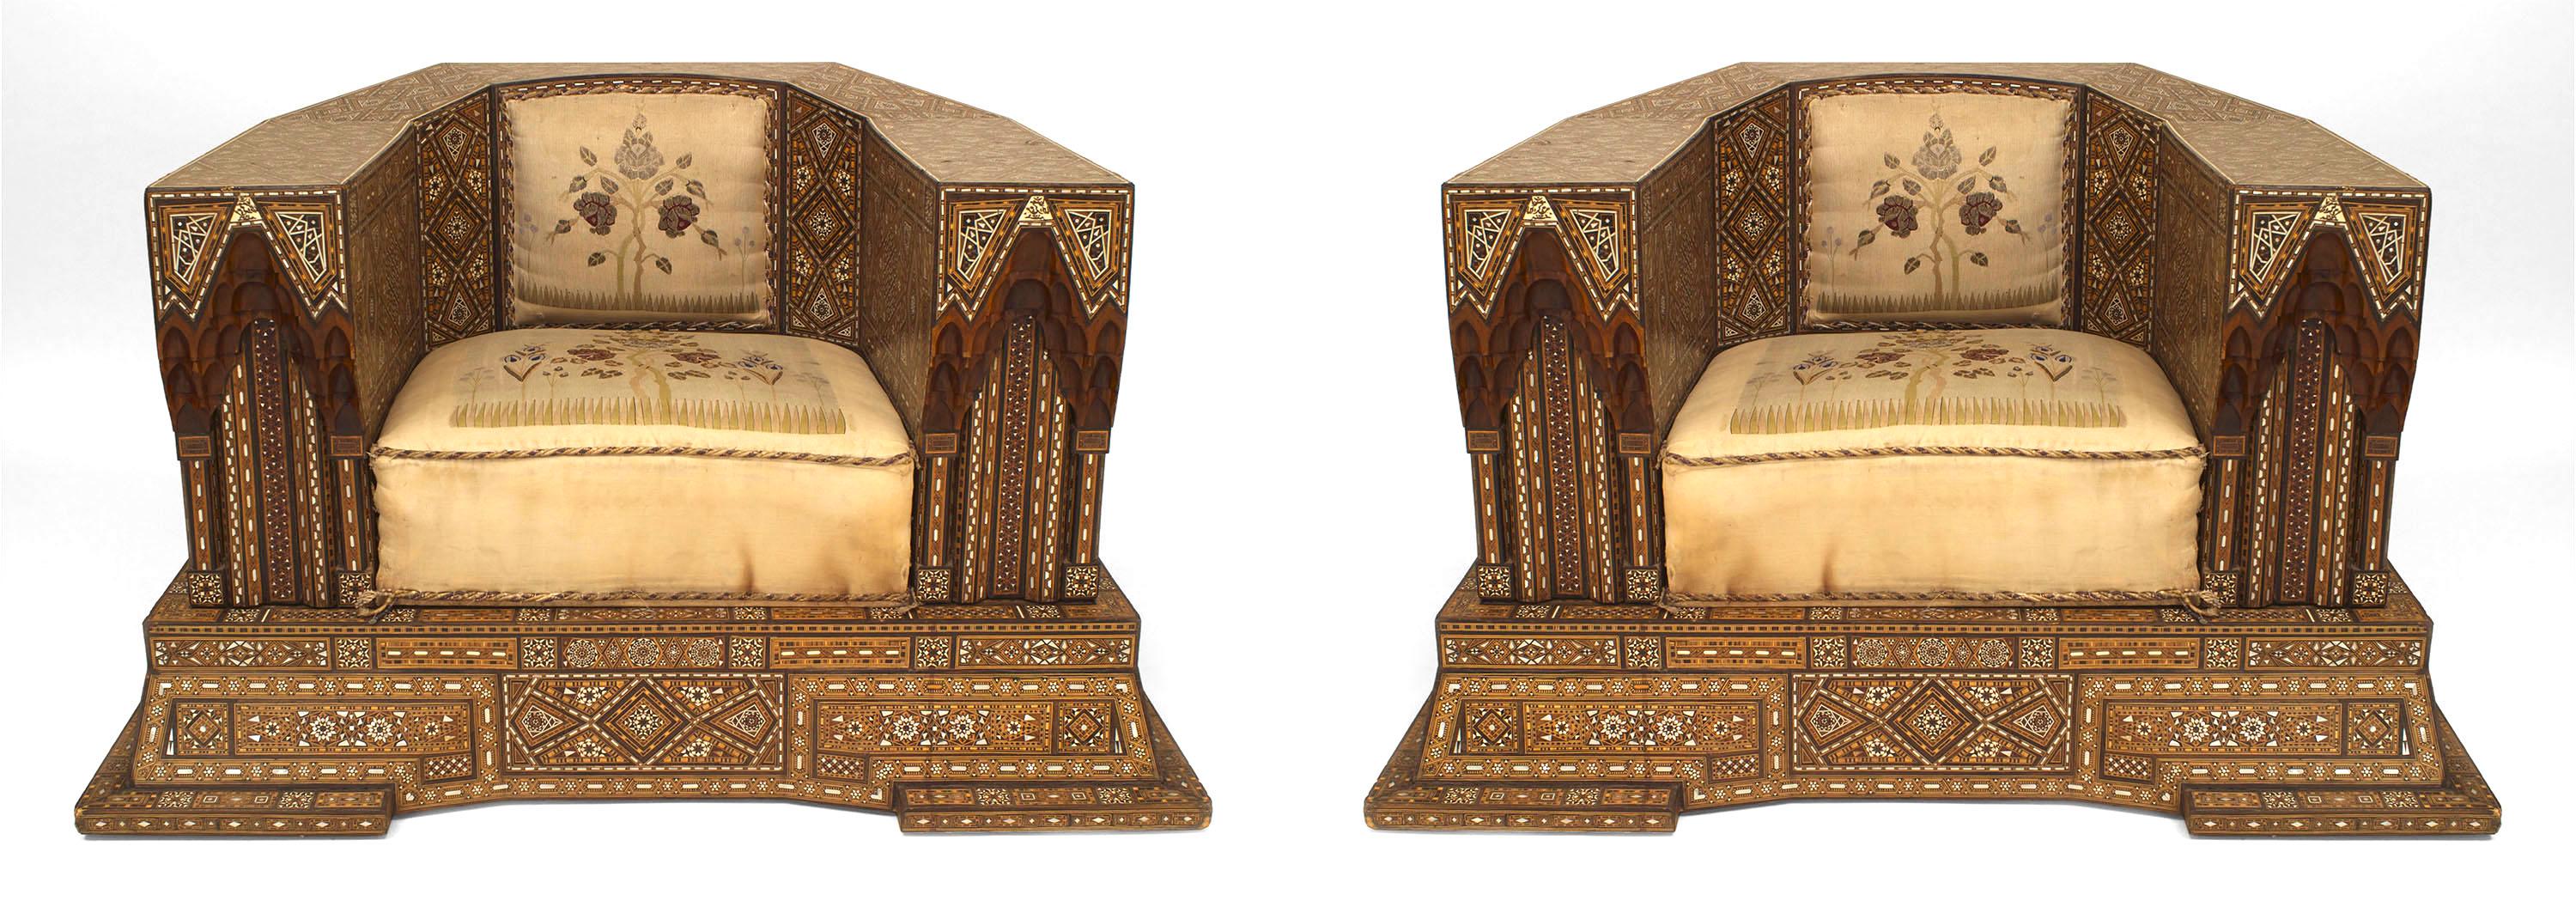 Pair of Syrian or Moorish club chairs dating to the first half of the twentieth century. Each oversized chair features canted back corners, an embroidered seat and back cushion, as well as inlaid geometric decorations of mother of pearl, bone, and